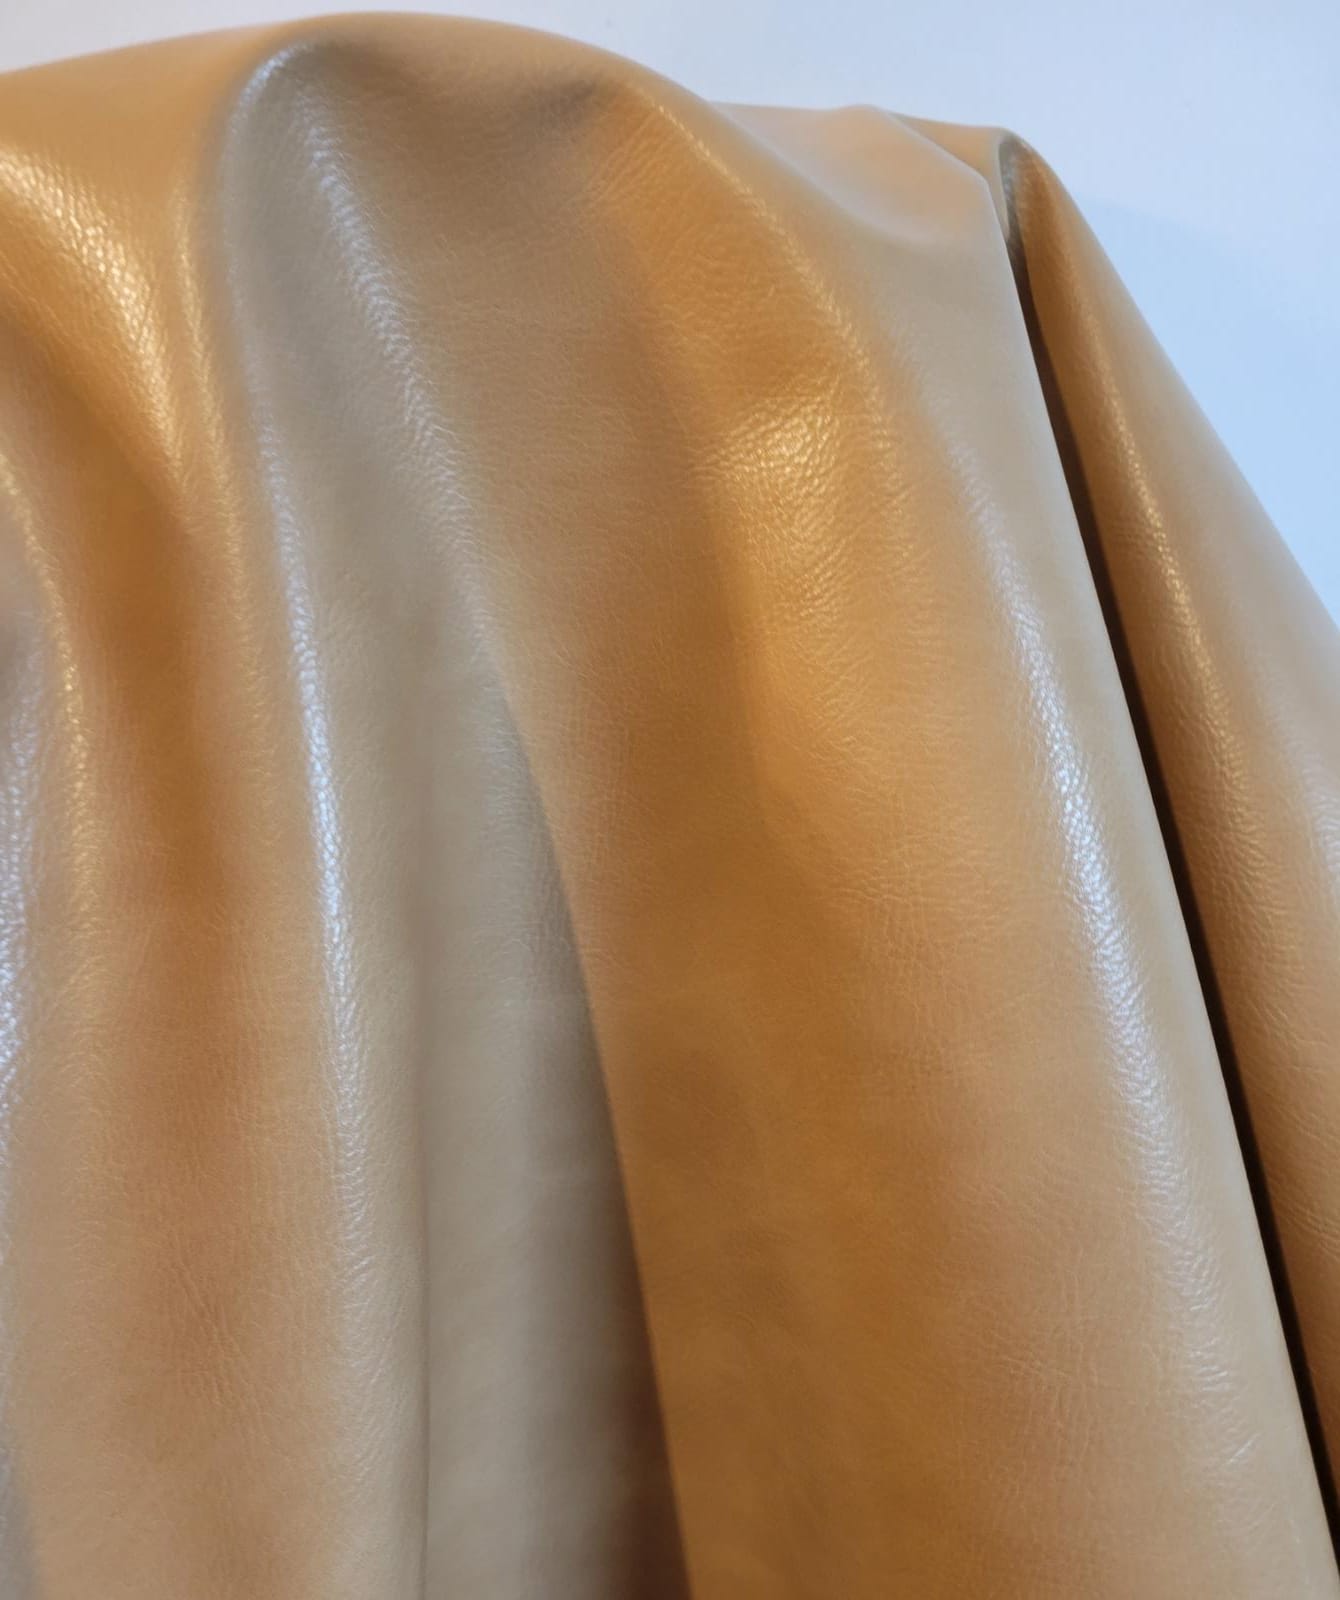  Faux vegan leather by the yard sheets distressed leather fabric for upholstery 30,000 Double Rubs vinyl sheets nappa leather crafts bookbinding books furniture fabrics uphilstery fuax material pu pleather faiux learher cruelty free nappa seat wheat pebble grain